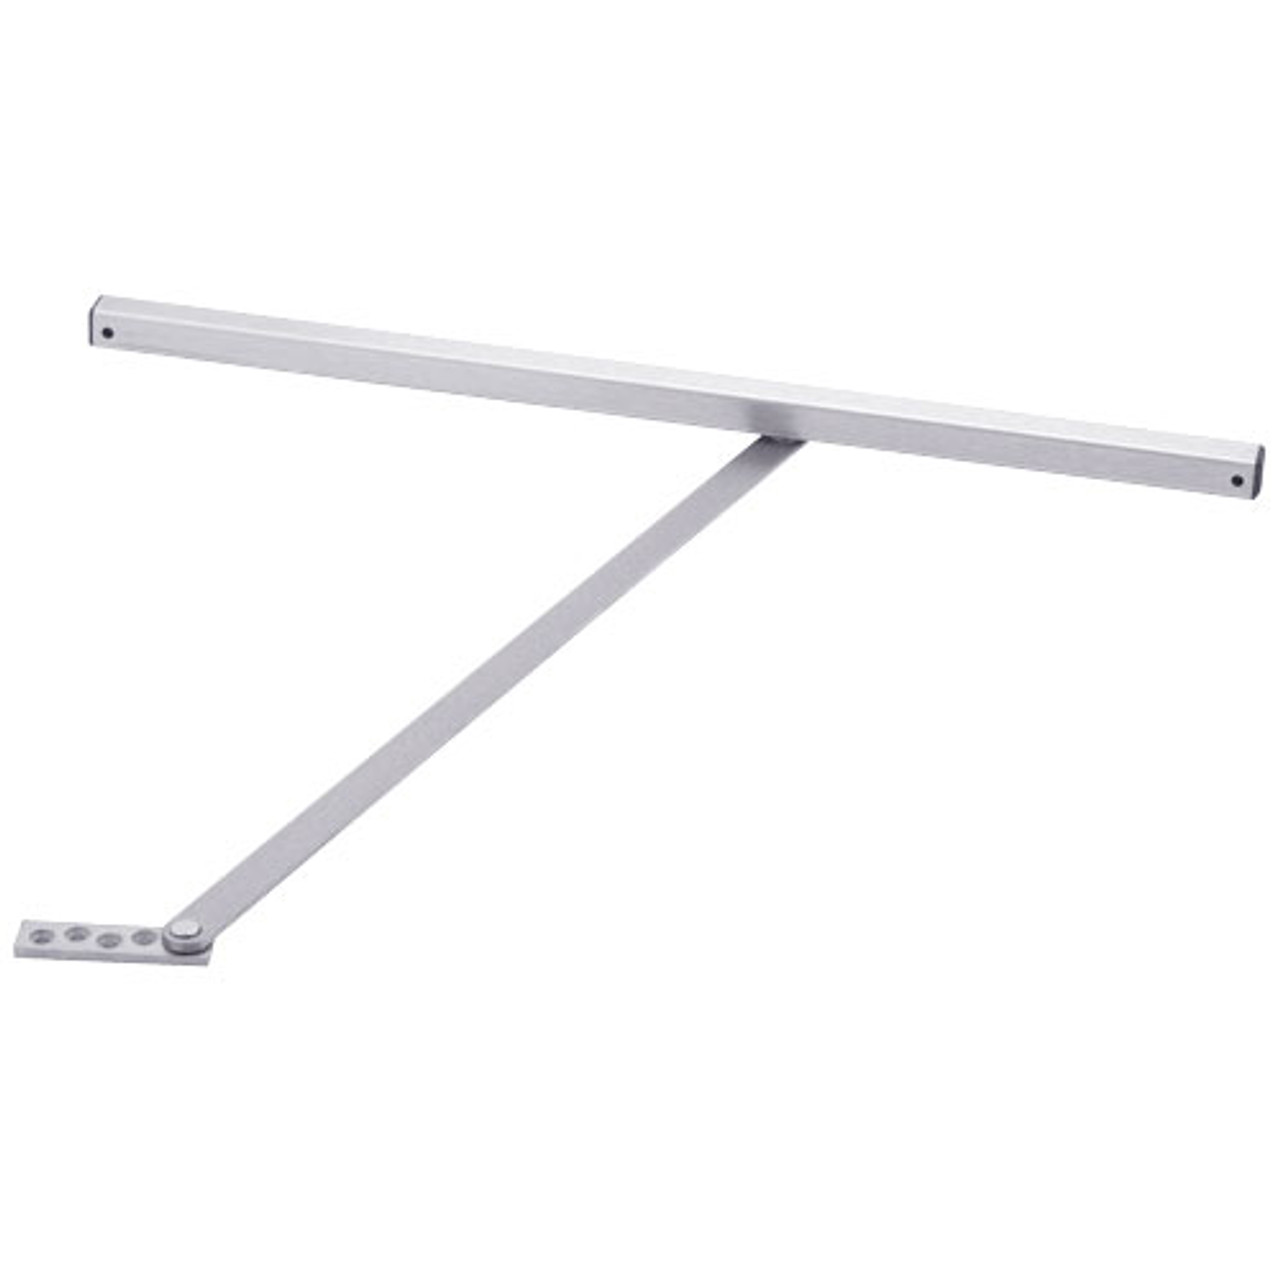 454H-US32 Glynn Johnson 450 Series Medium Duty Surface Overhead in Polished stainless steel